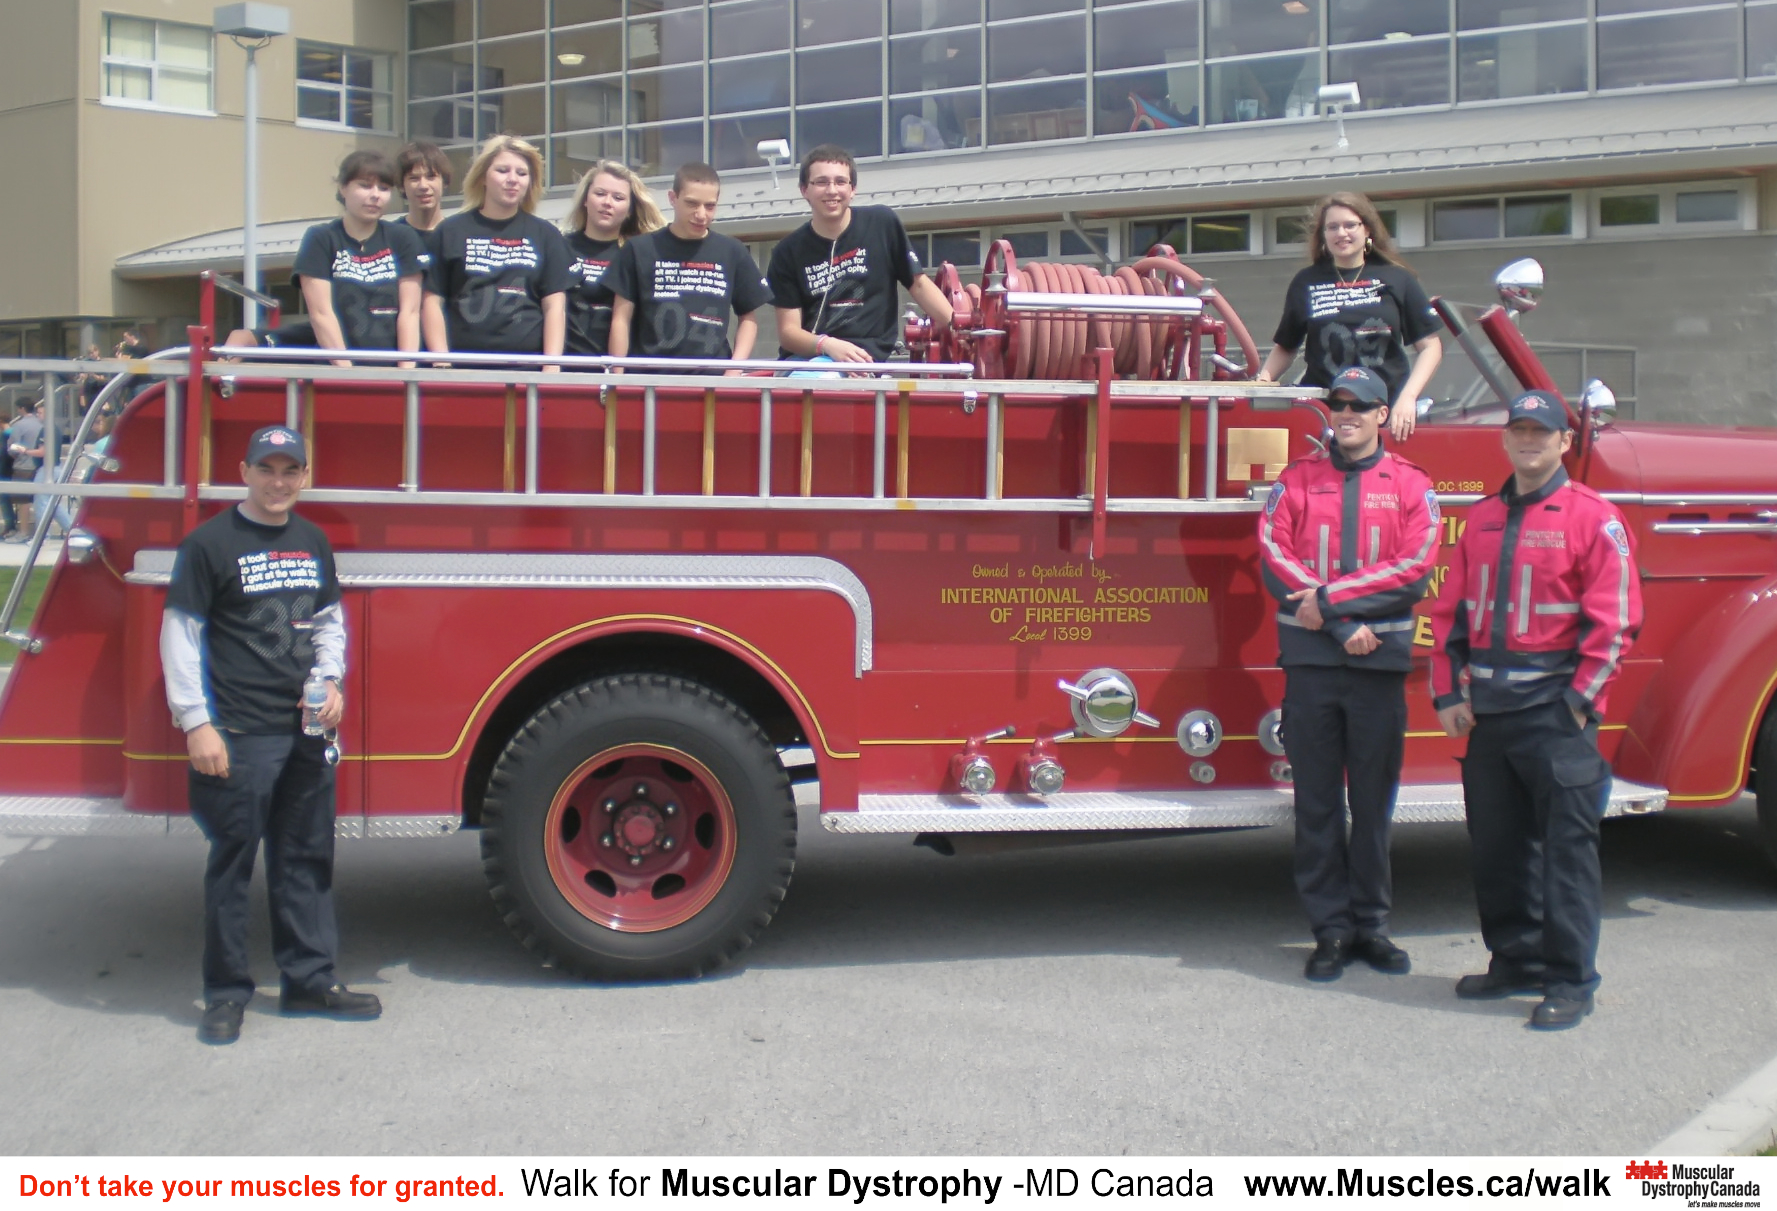 12.6 Firefighters fundraise for muscular dystrophy